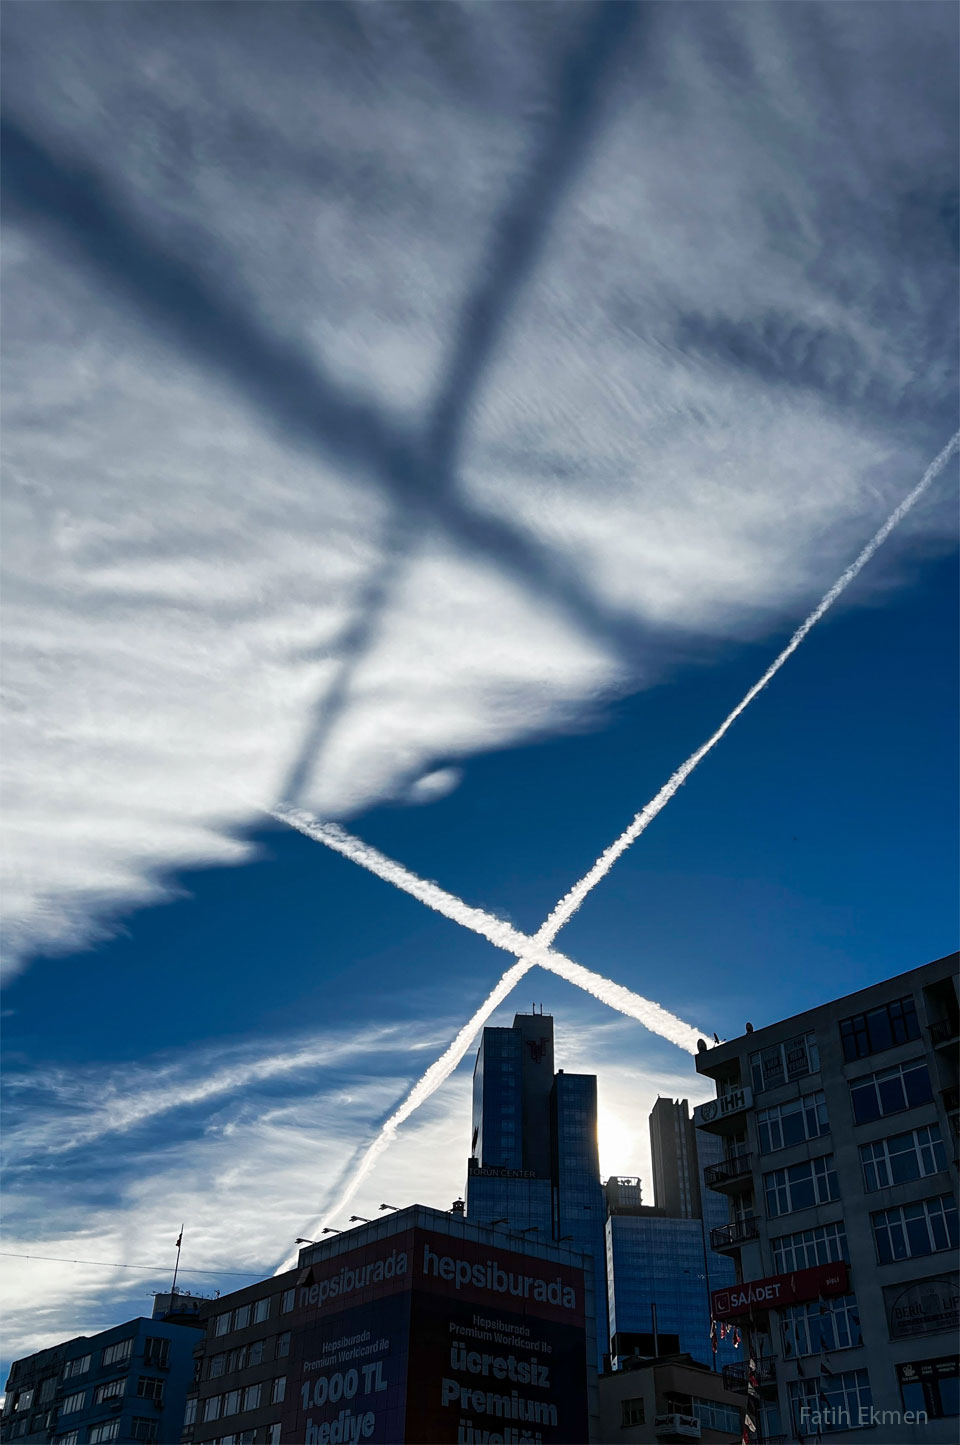 Two airplane contrails, crossing in an X, are shown across
the middle of the image. They are bright white against a dark
blue background. A high cloud deck is seen above the crossing,
sunlit, contrails. A low Sun creates a dark shadow X on the high
while clouds. A row of buildings runs across the lower
part of the image. 
Więcej szczegółowych informacji w opisie poniżej.